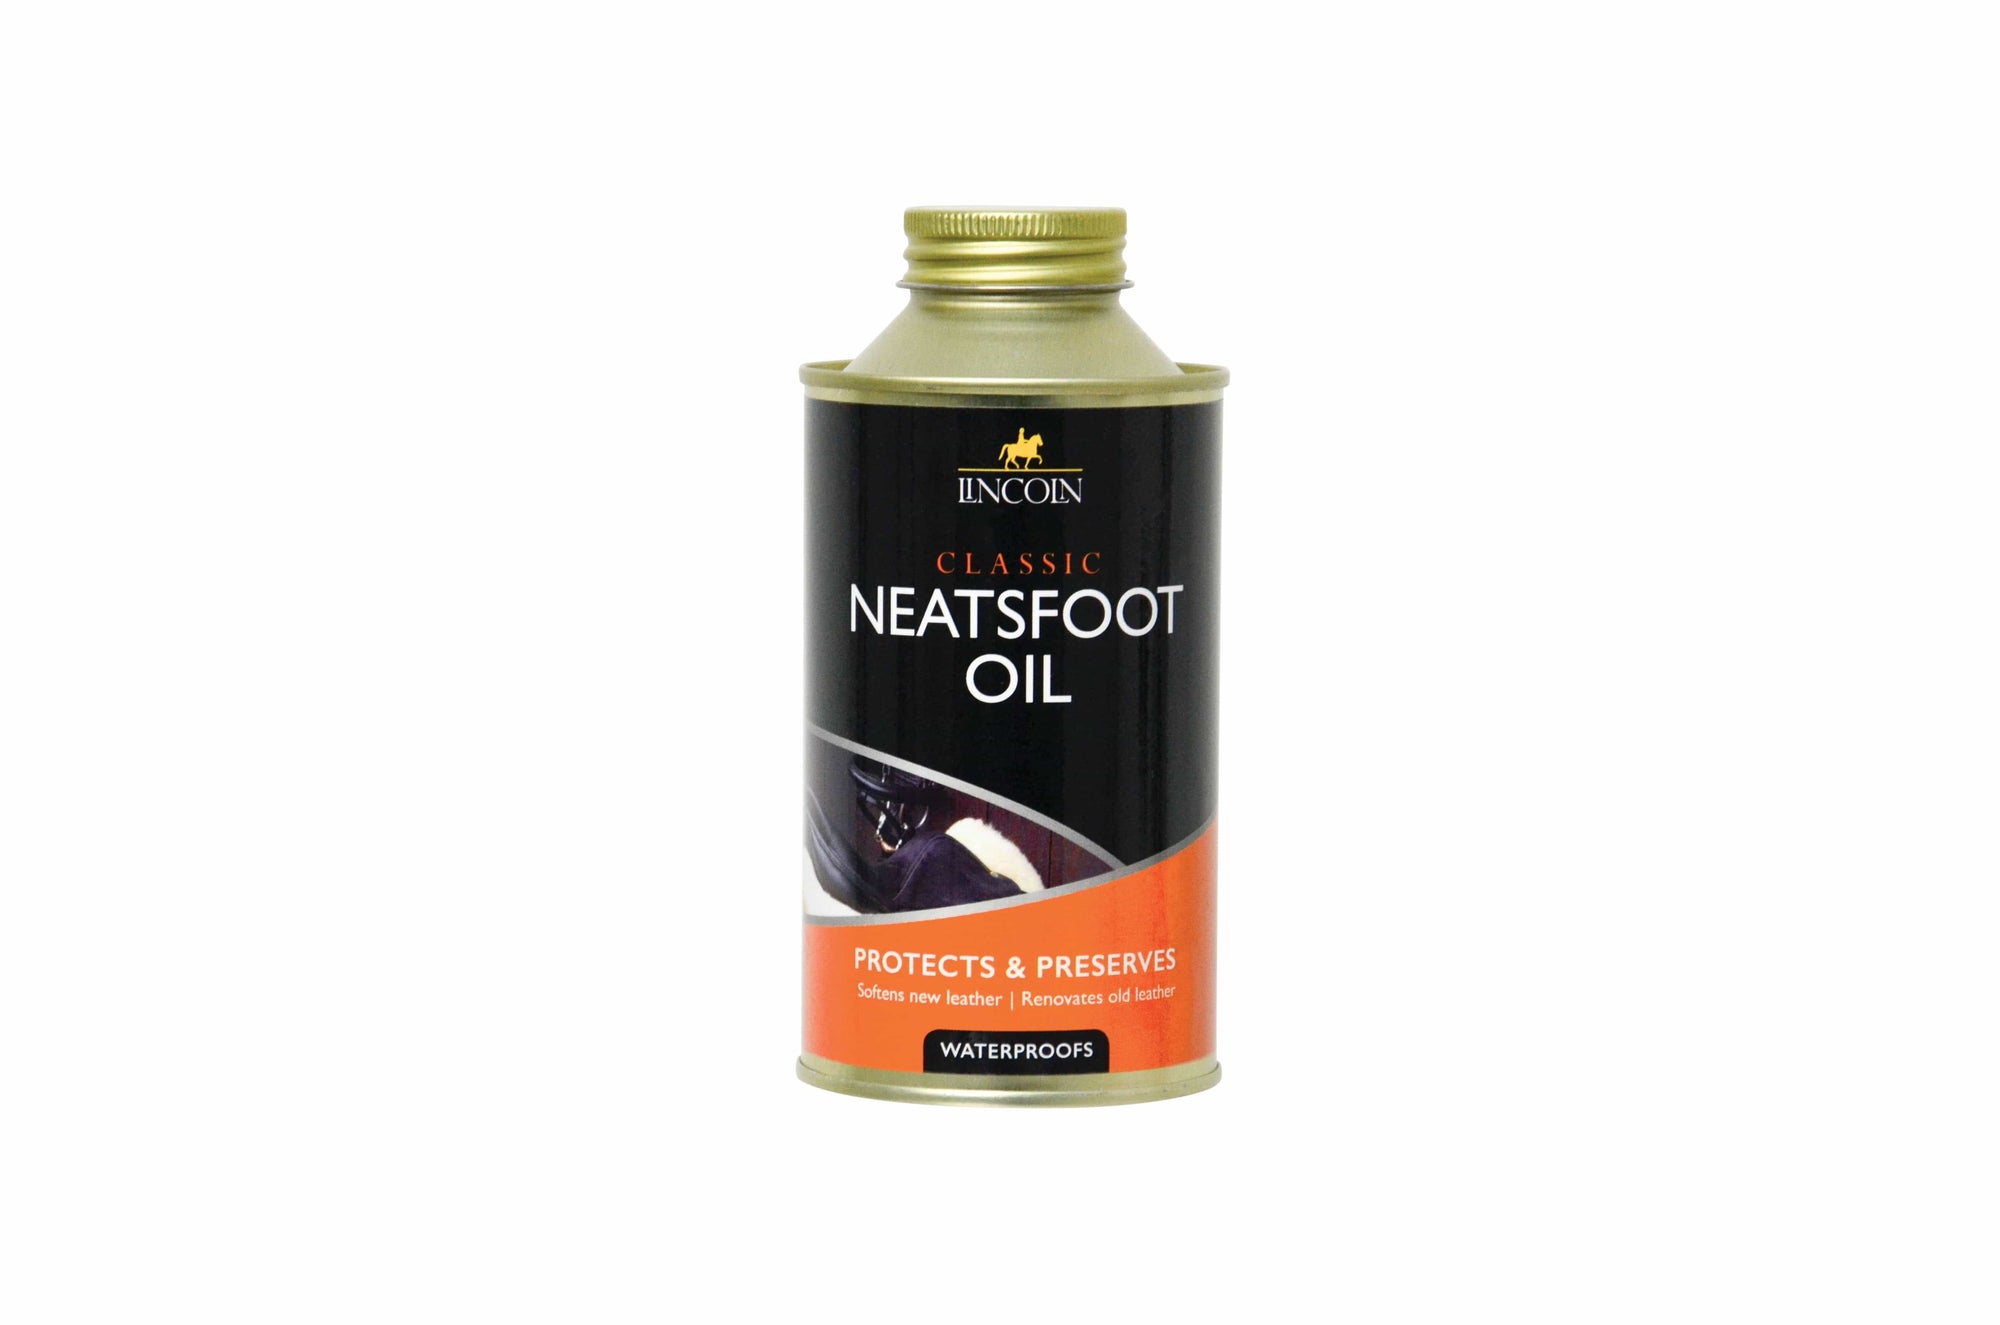 Lincoln classic neatsfoot oil